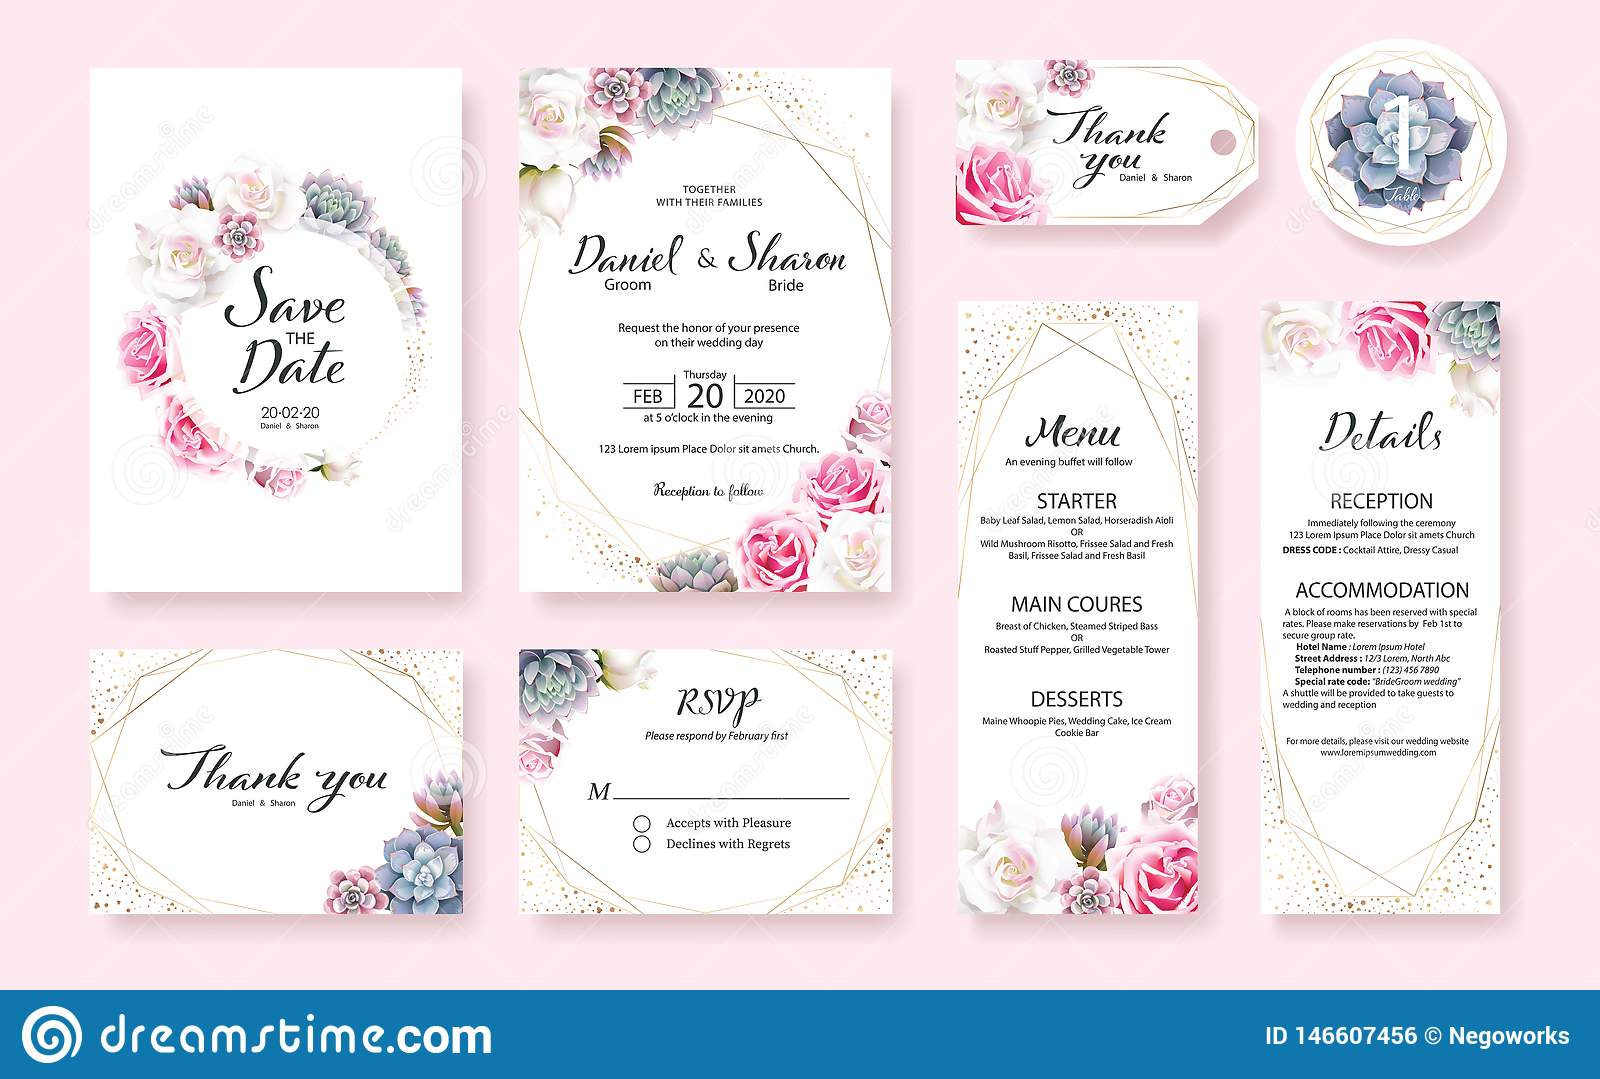 Floral Wedding Invitation Card, Save The Date, Thank You In Table Reservation Card Template